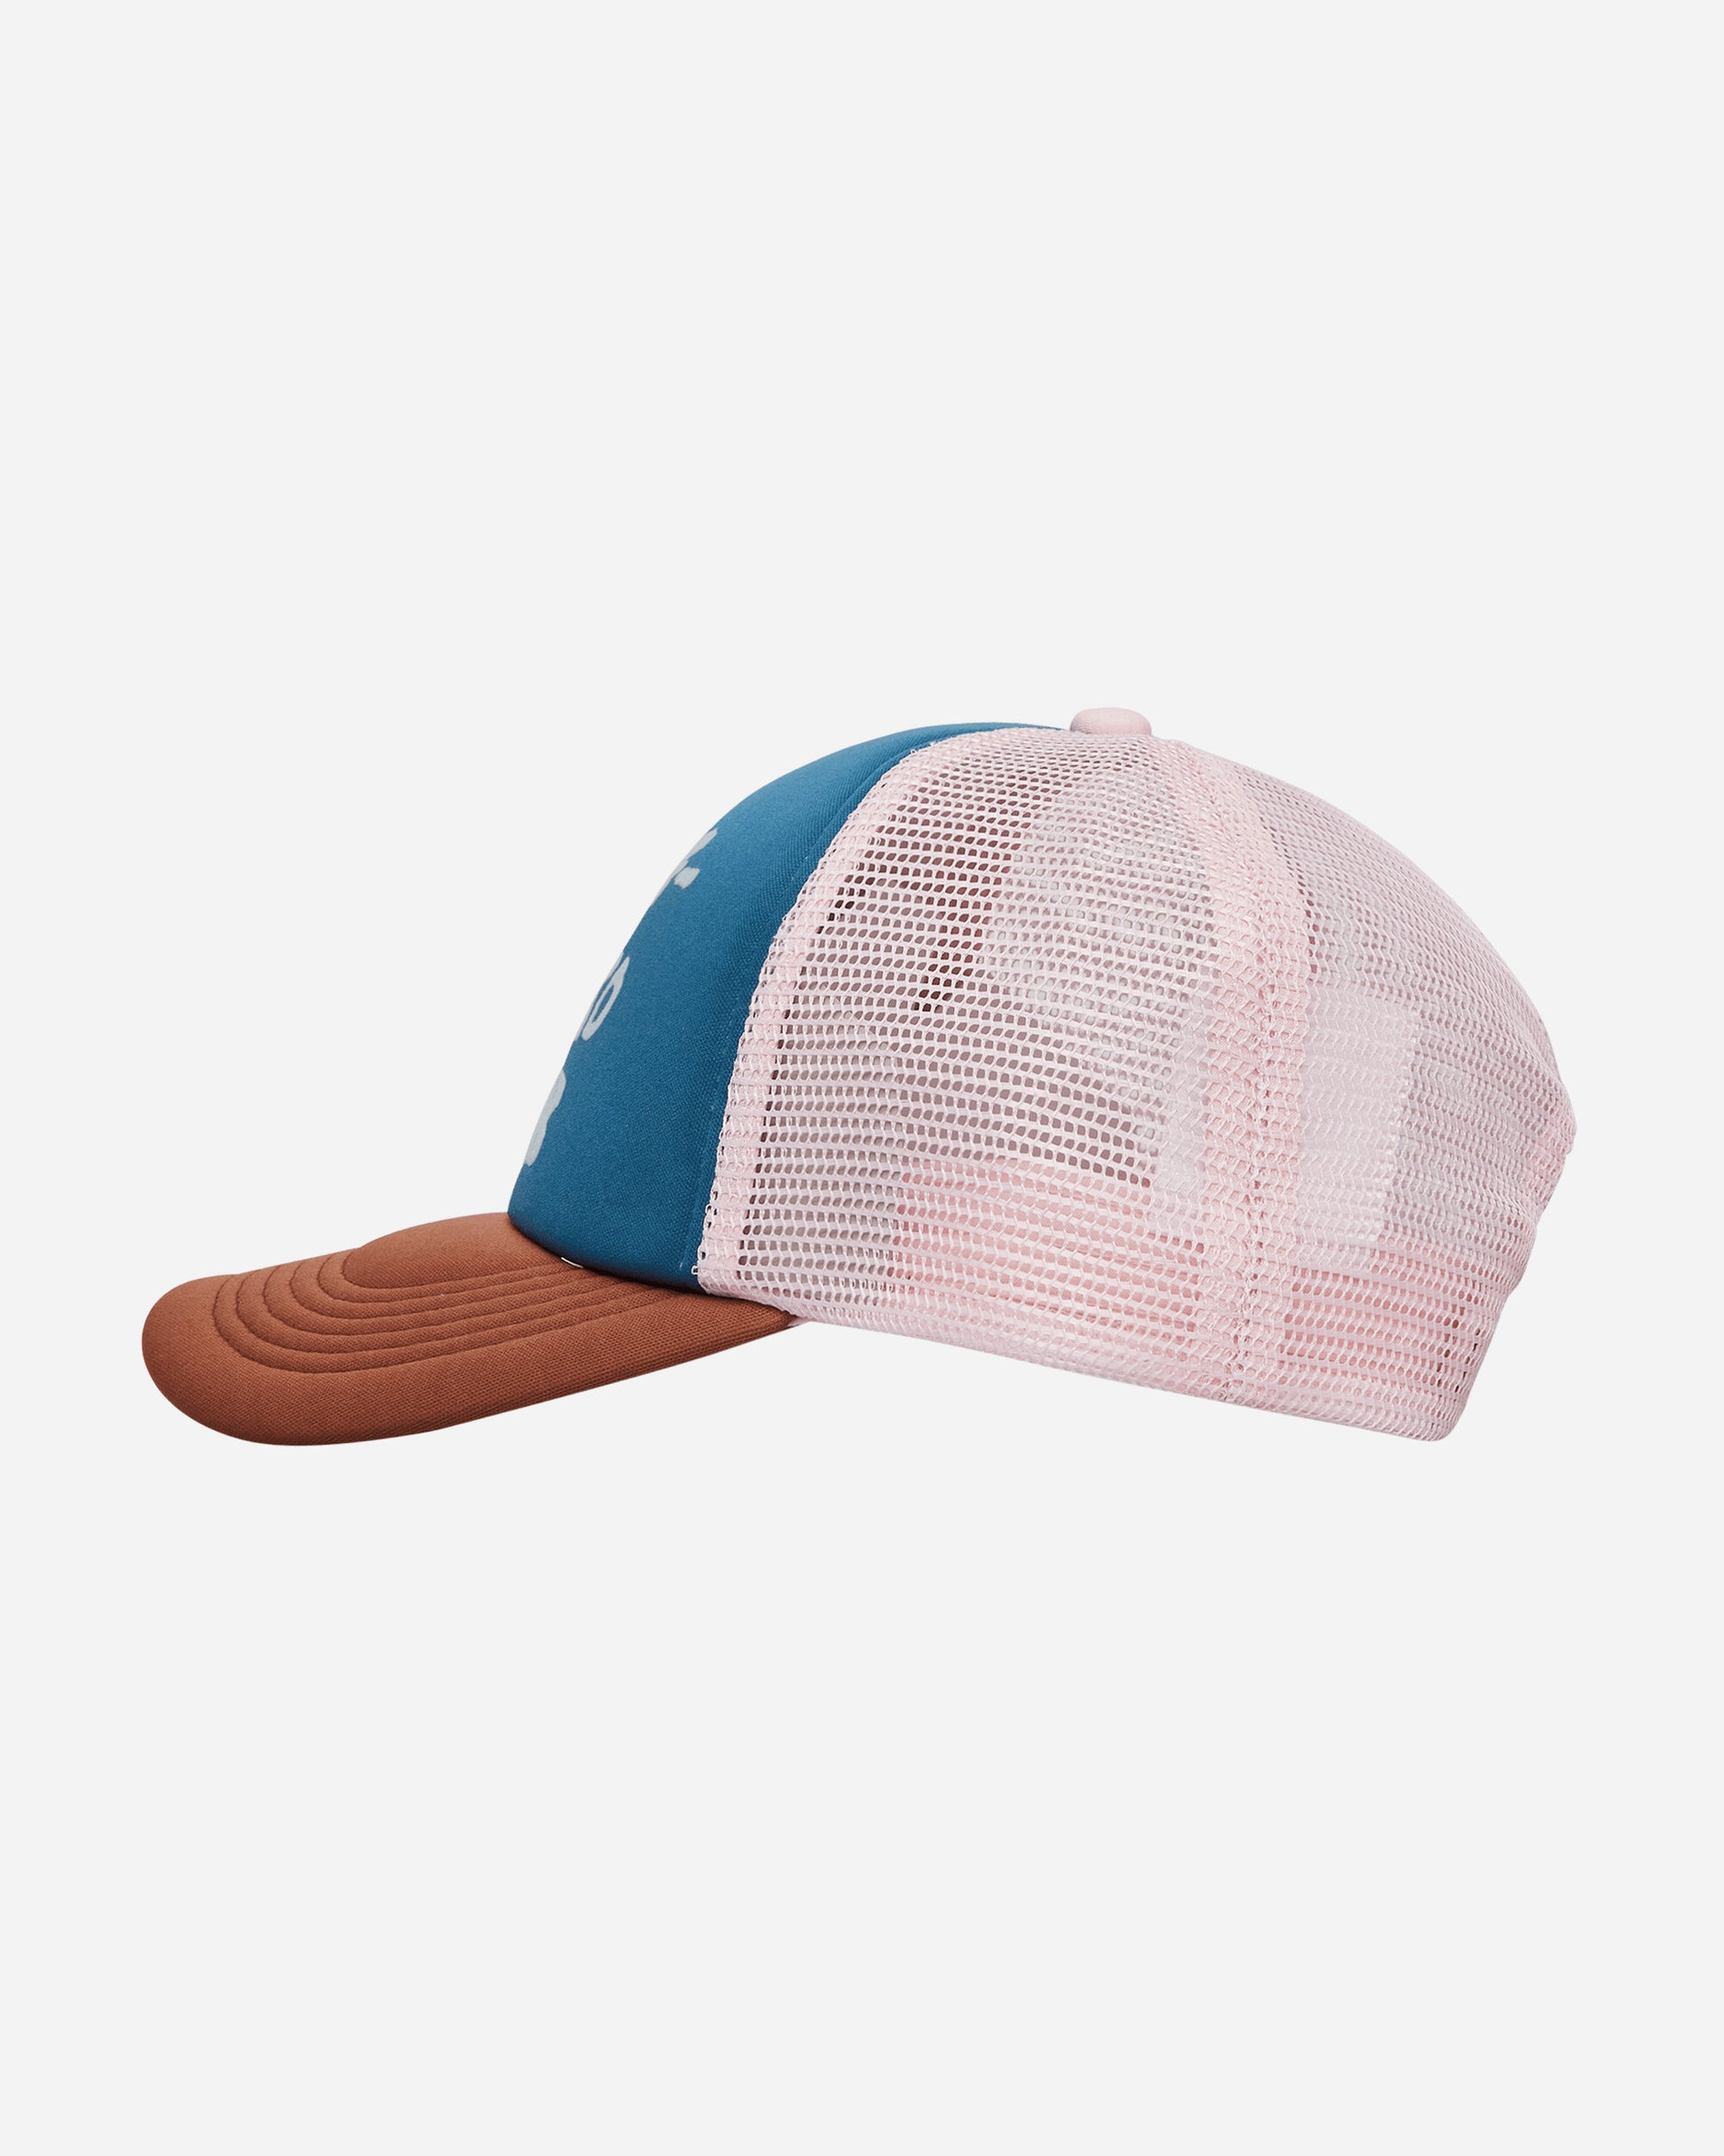 Stockholm (Surfboard) Club Pete Logo Blue and Brown Hats Caps U7000056 1